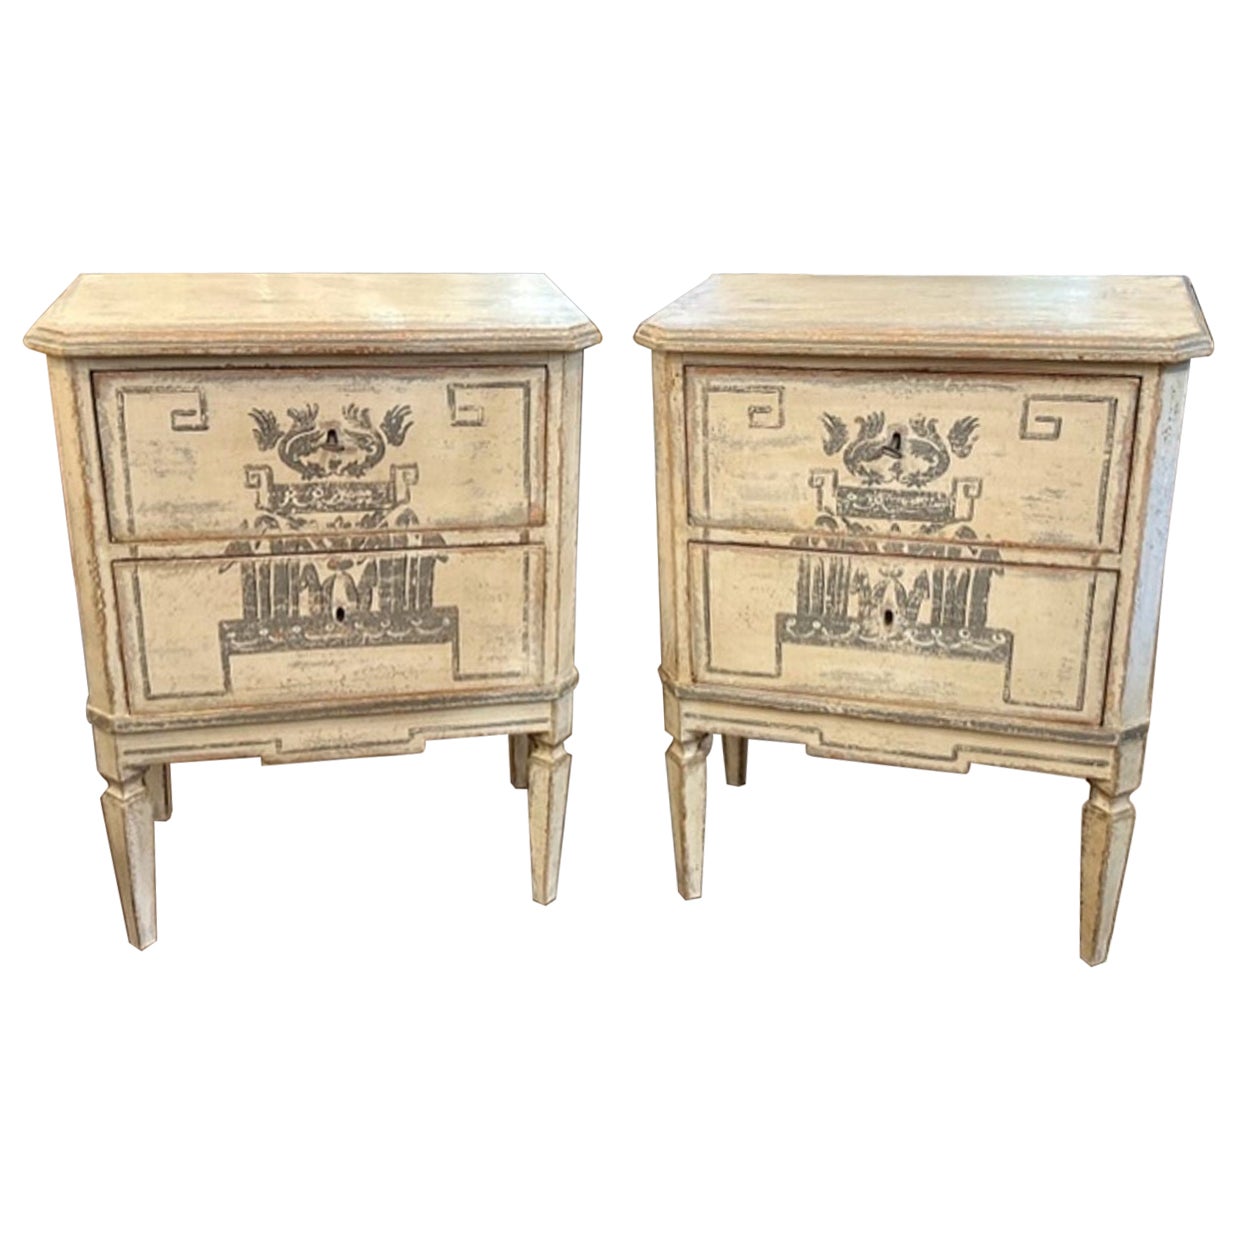 Pair of German Neo-Classical Bedside Tables